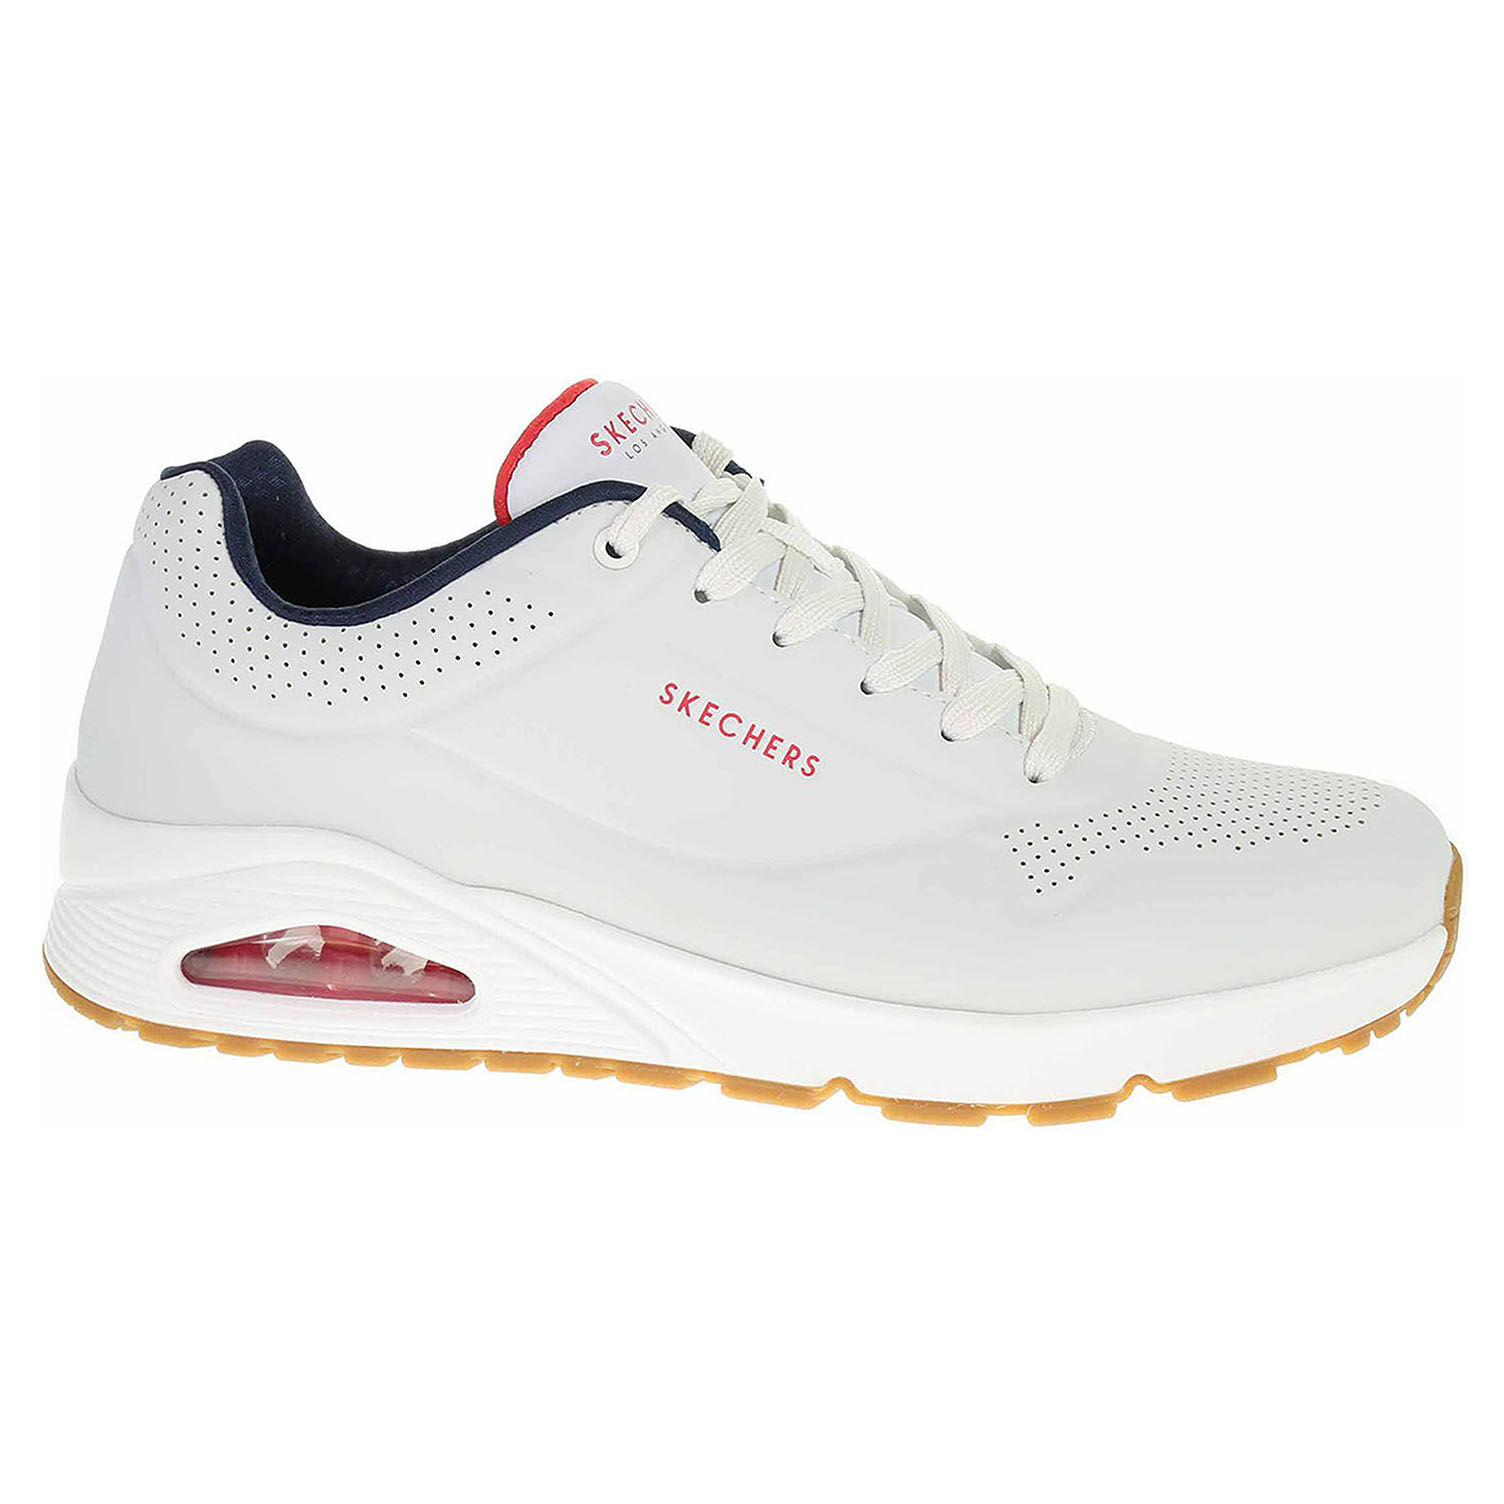 Skechers Uno - Stand On Air white-navy-red 41